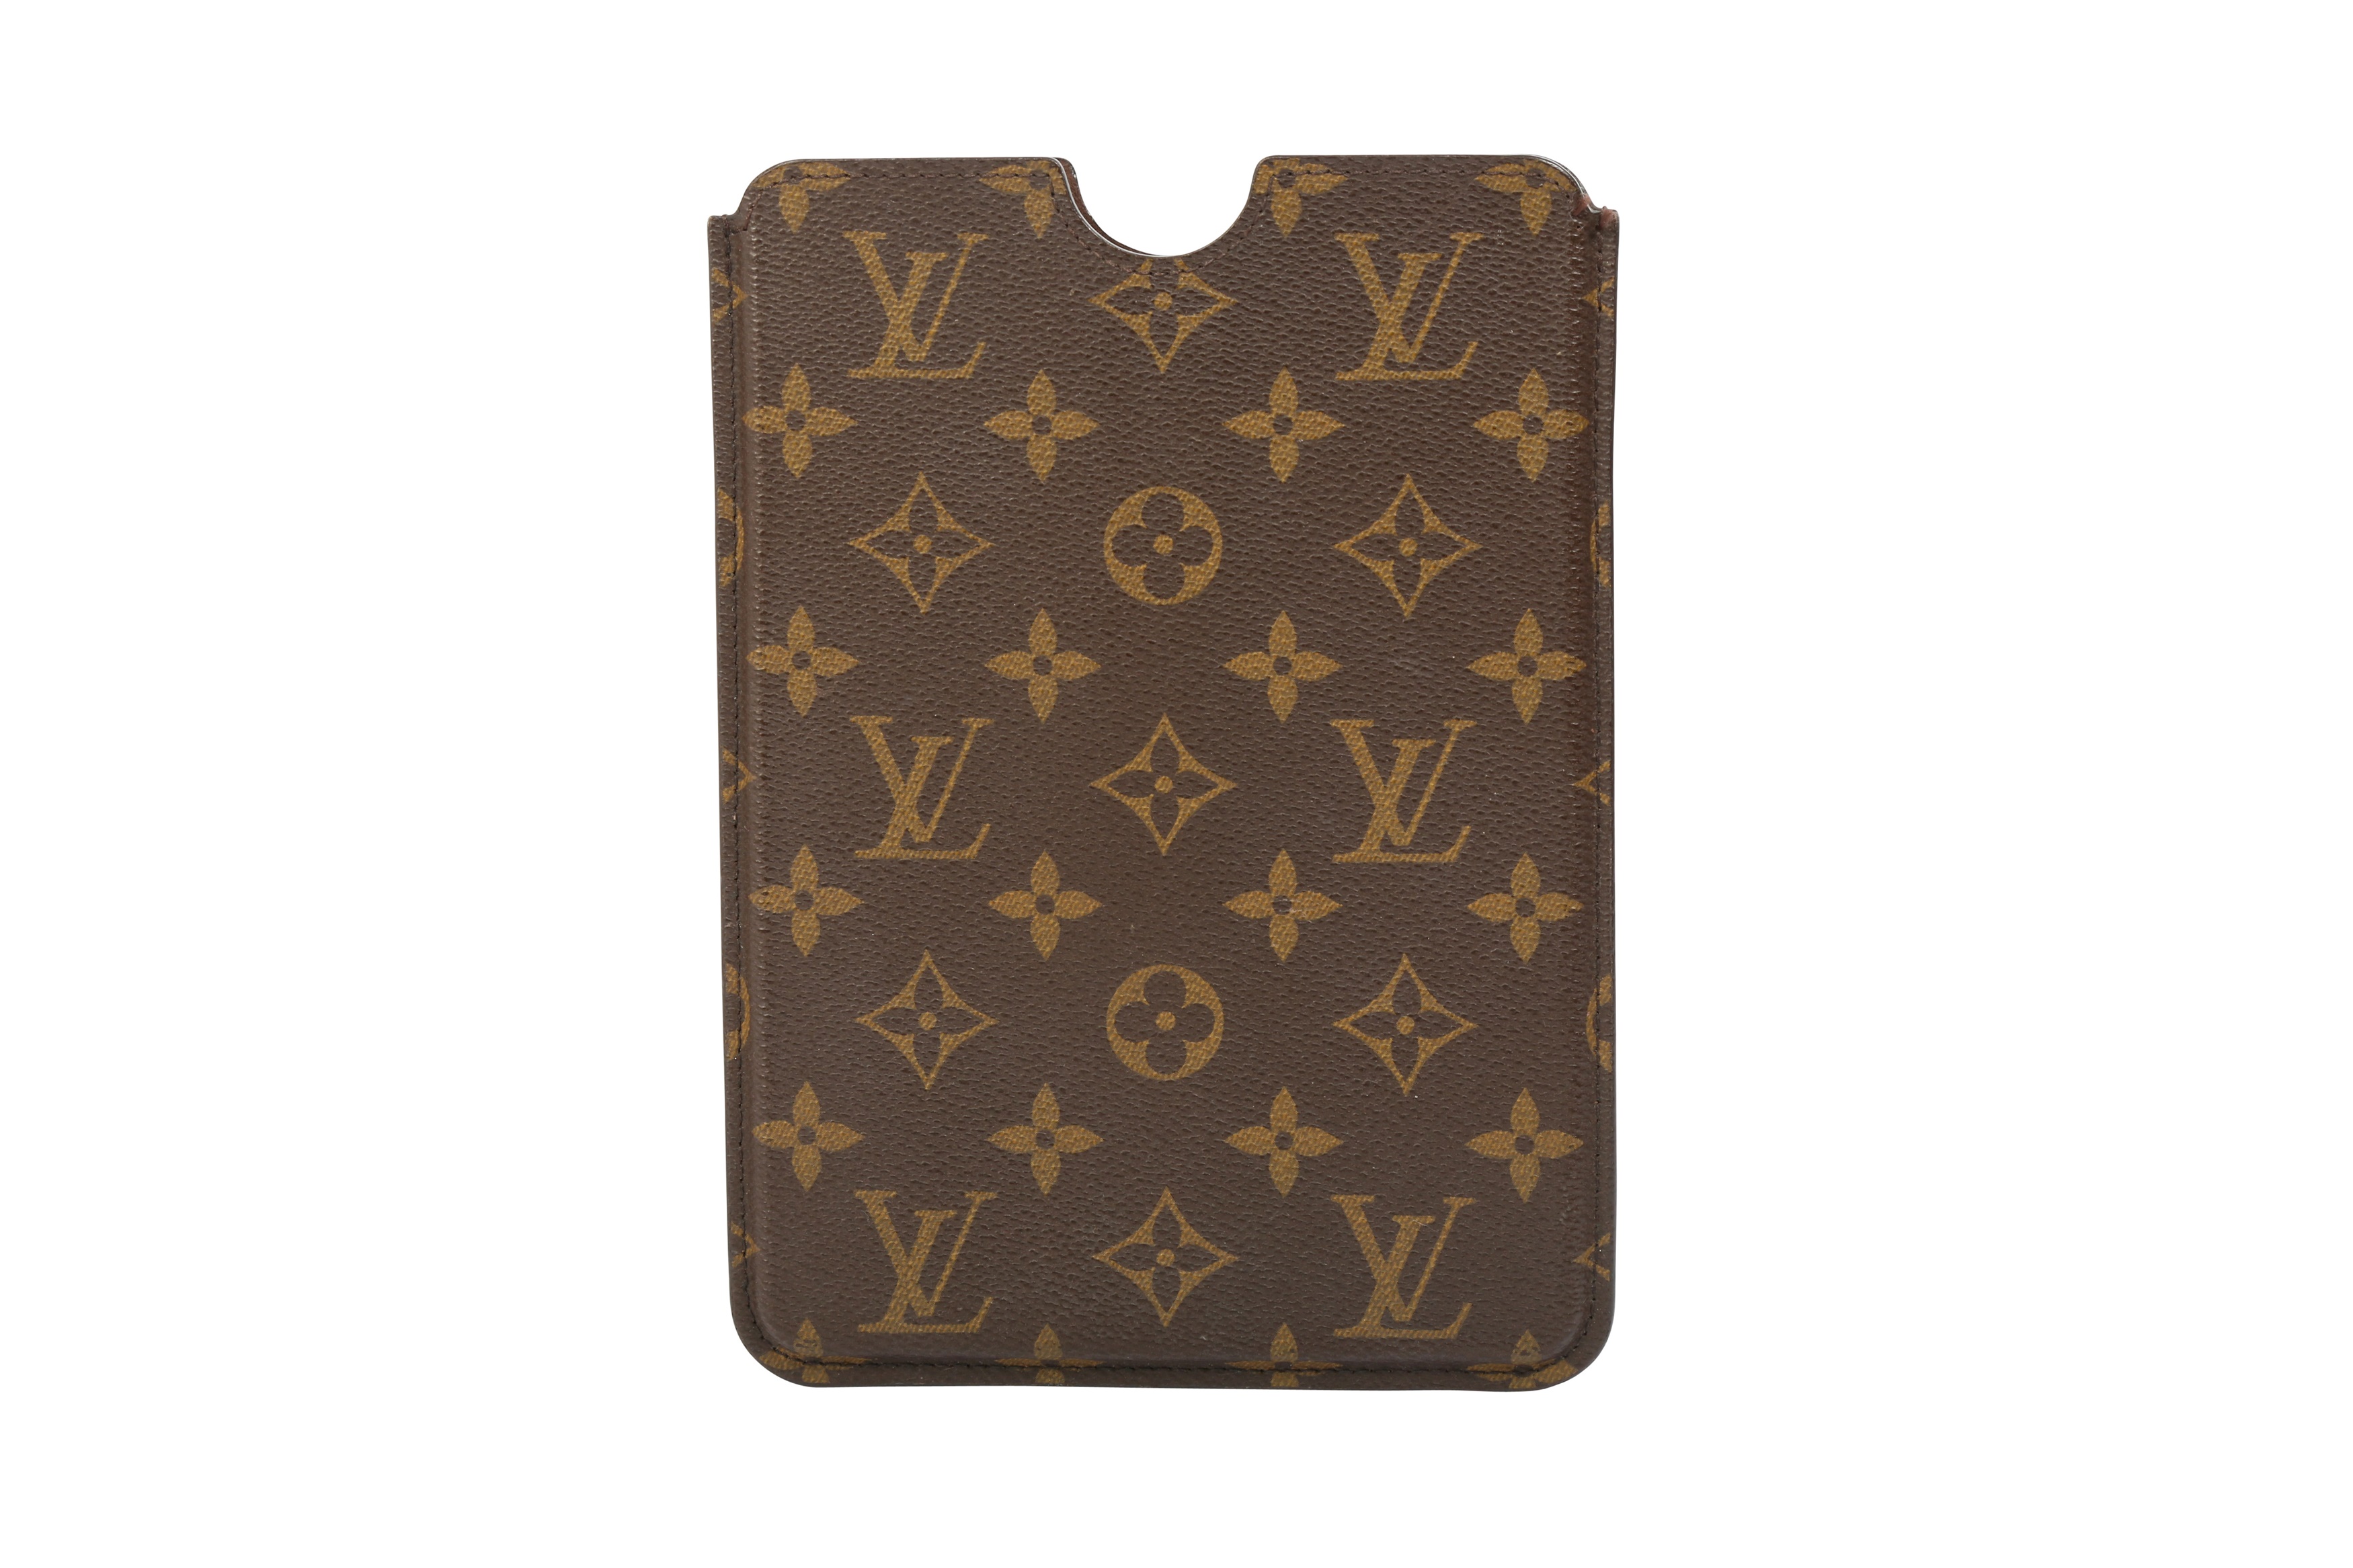 Sold at Auction: A Louis Vuitton iPad case, in monogram coated